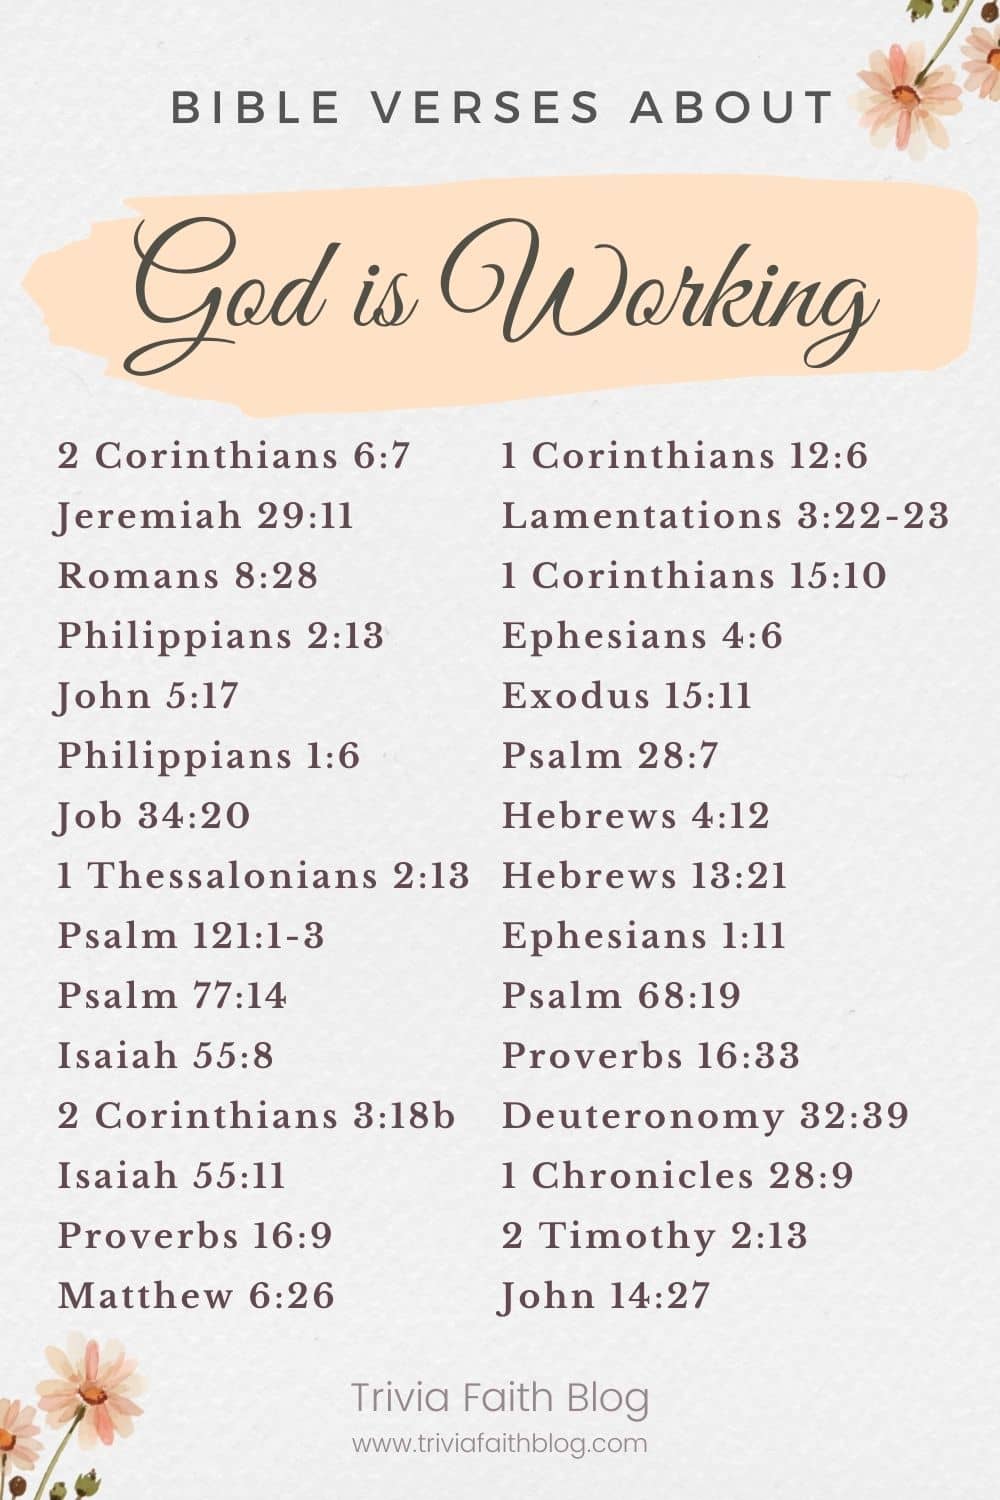 Bible verses about God Is Working